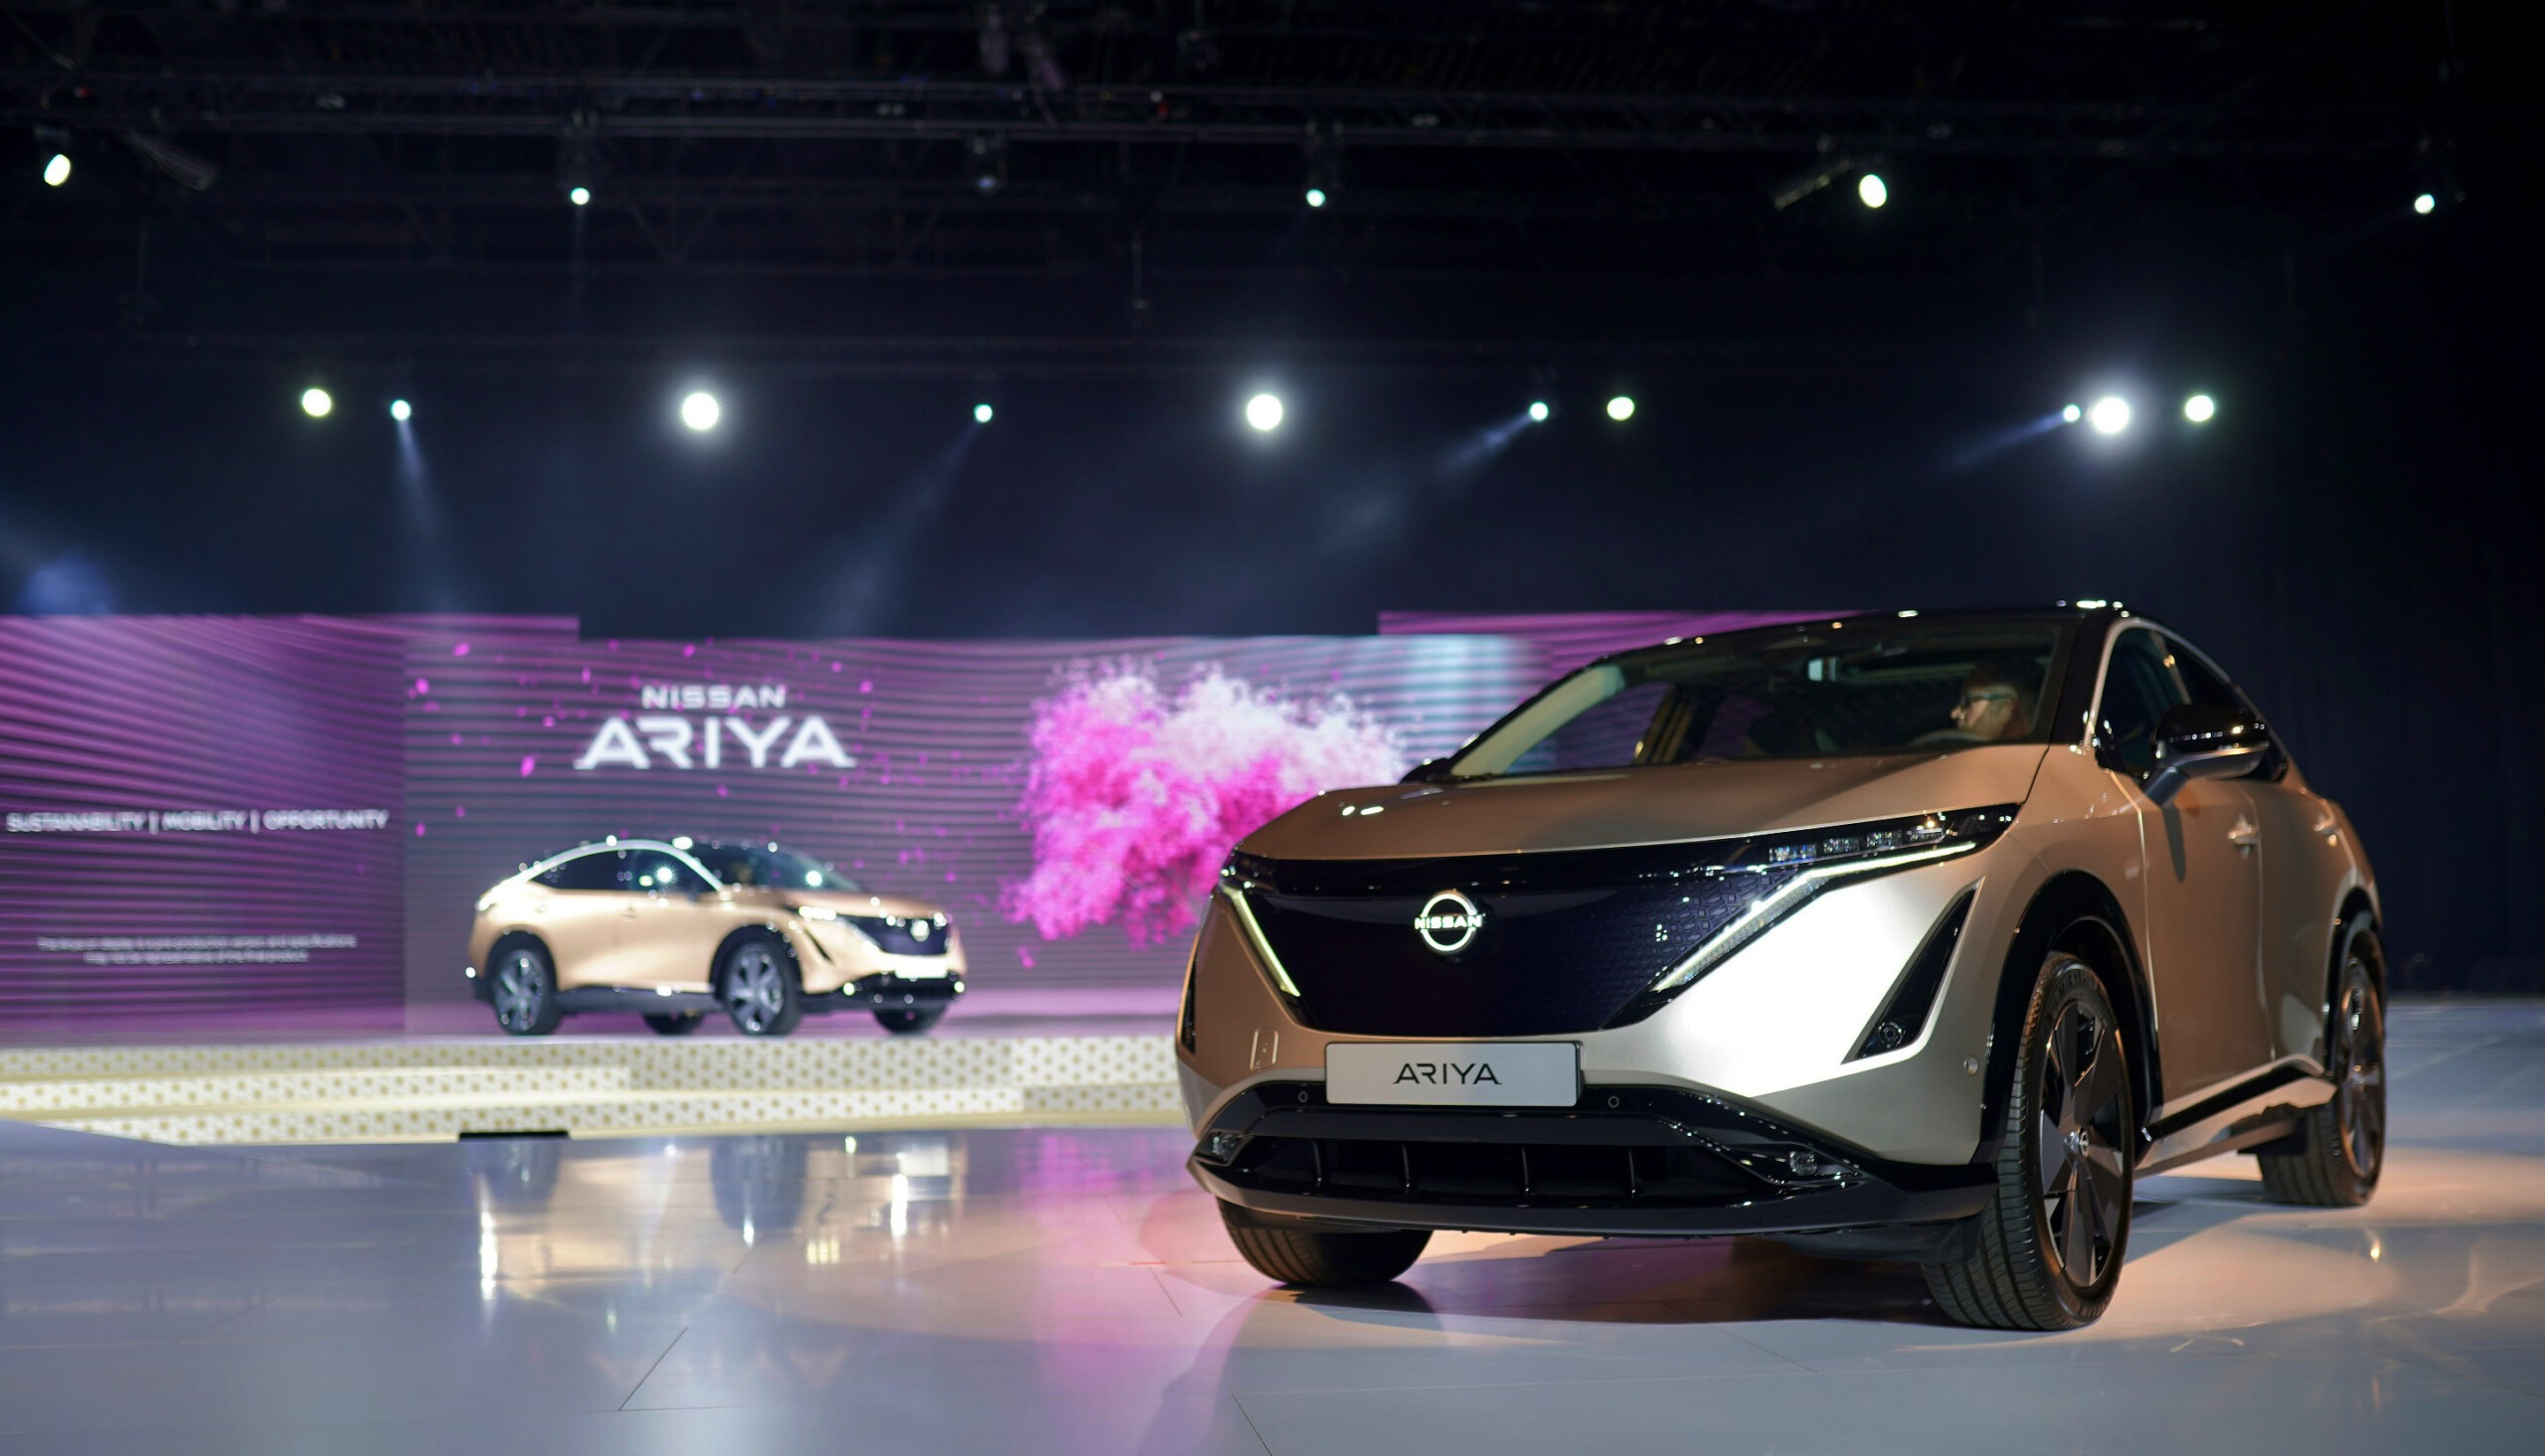 Nissan Ariya – First Regional Showcase during the “ Let’s Move Event “